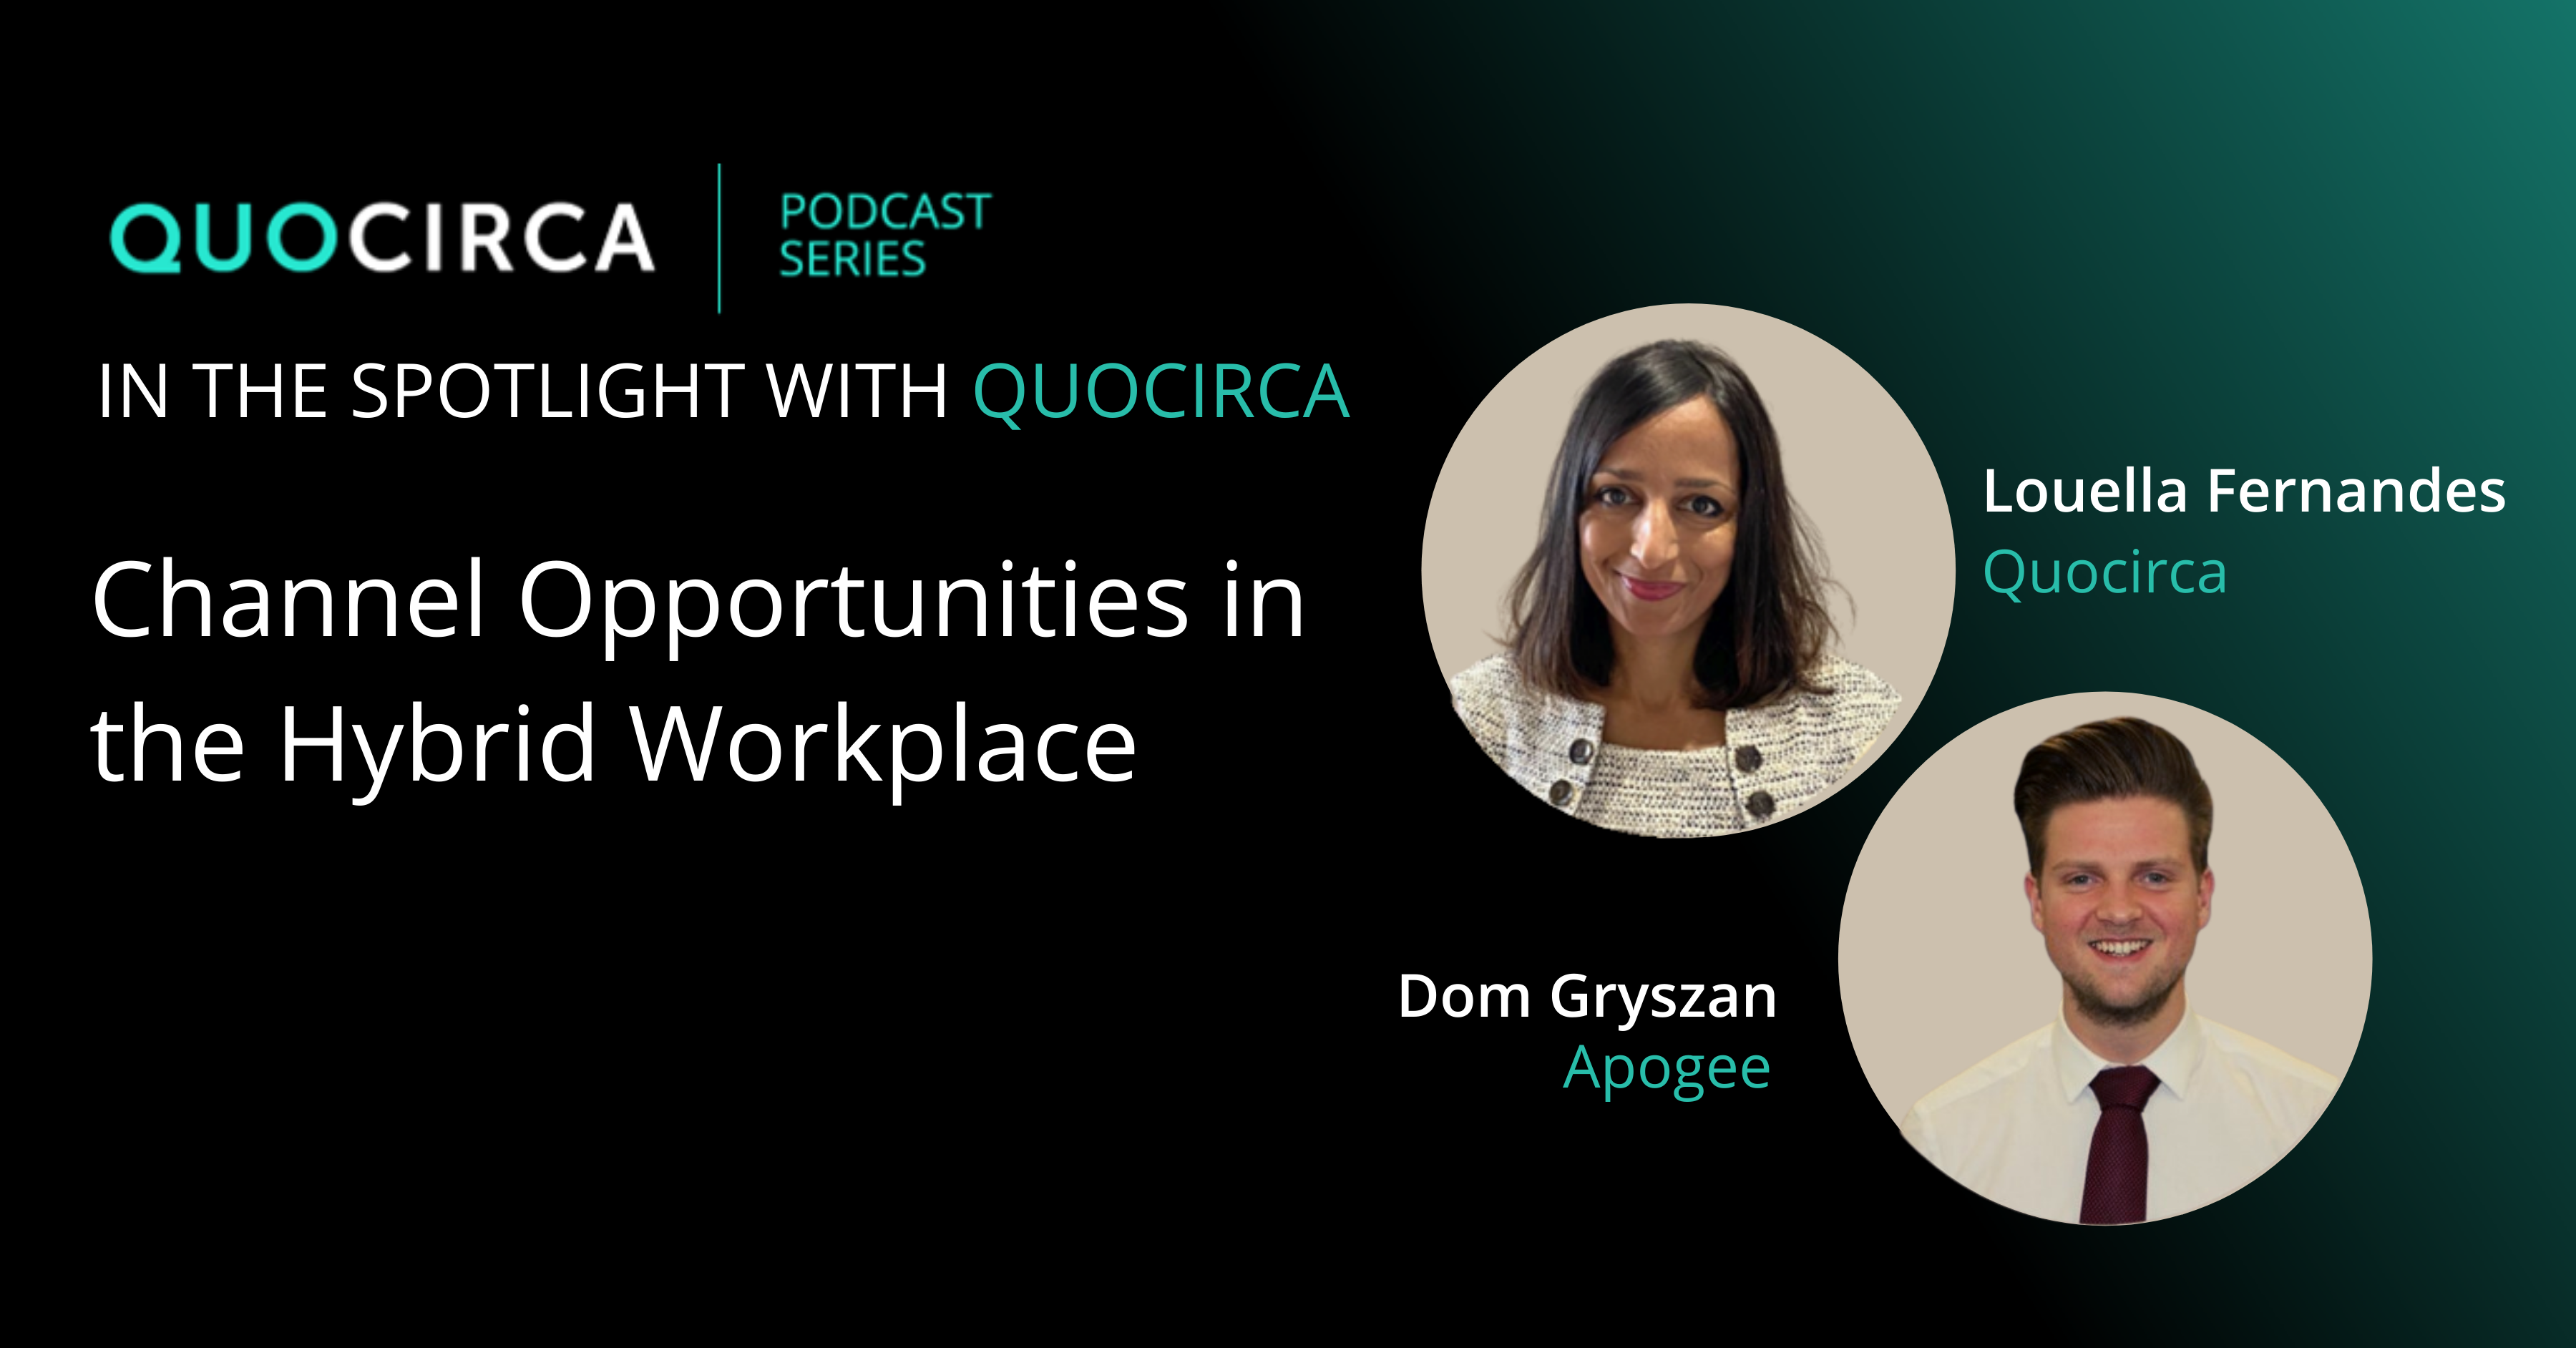 Channel Opportunities in the Hybrid Workplace with Dom Gryszan, Apogee